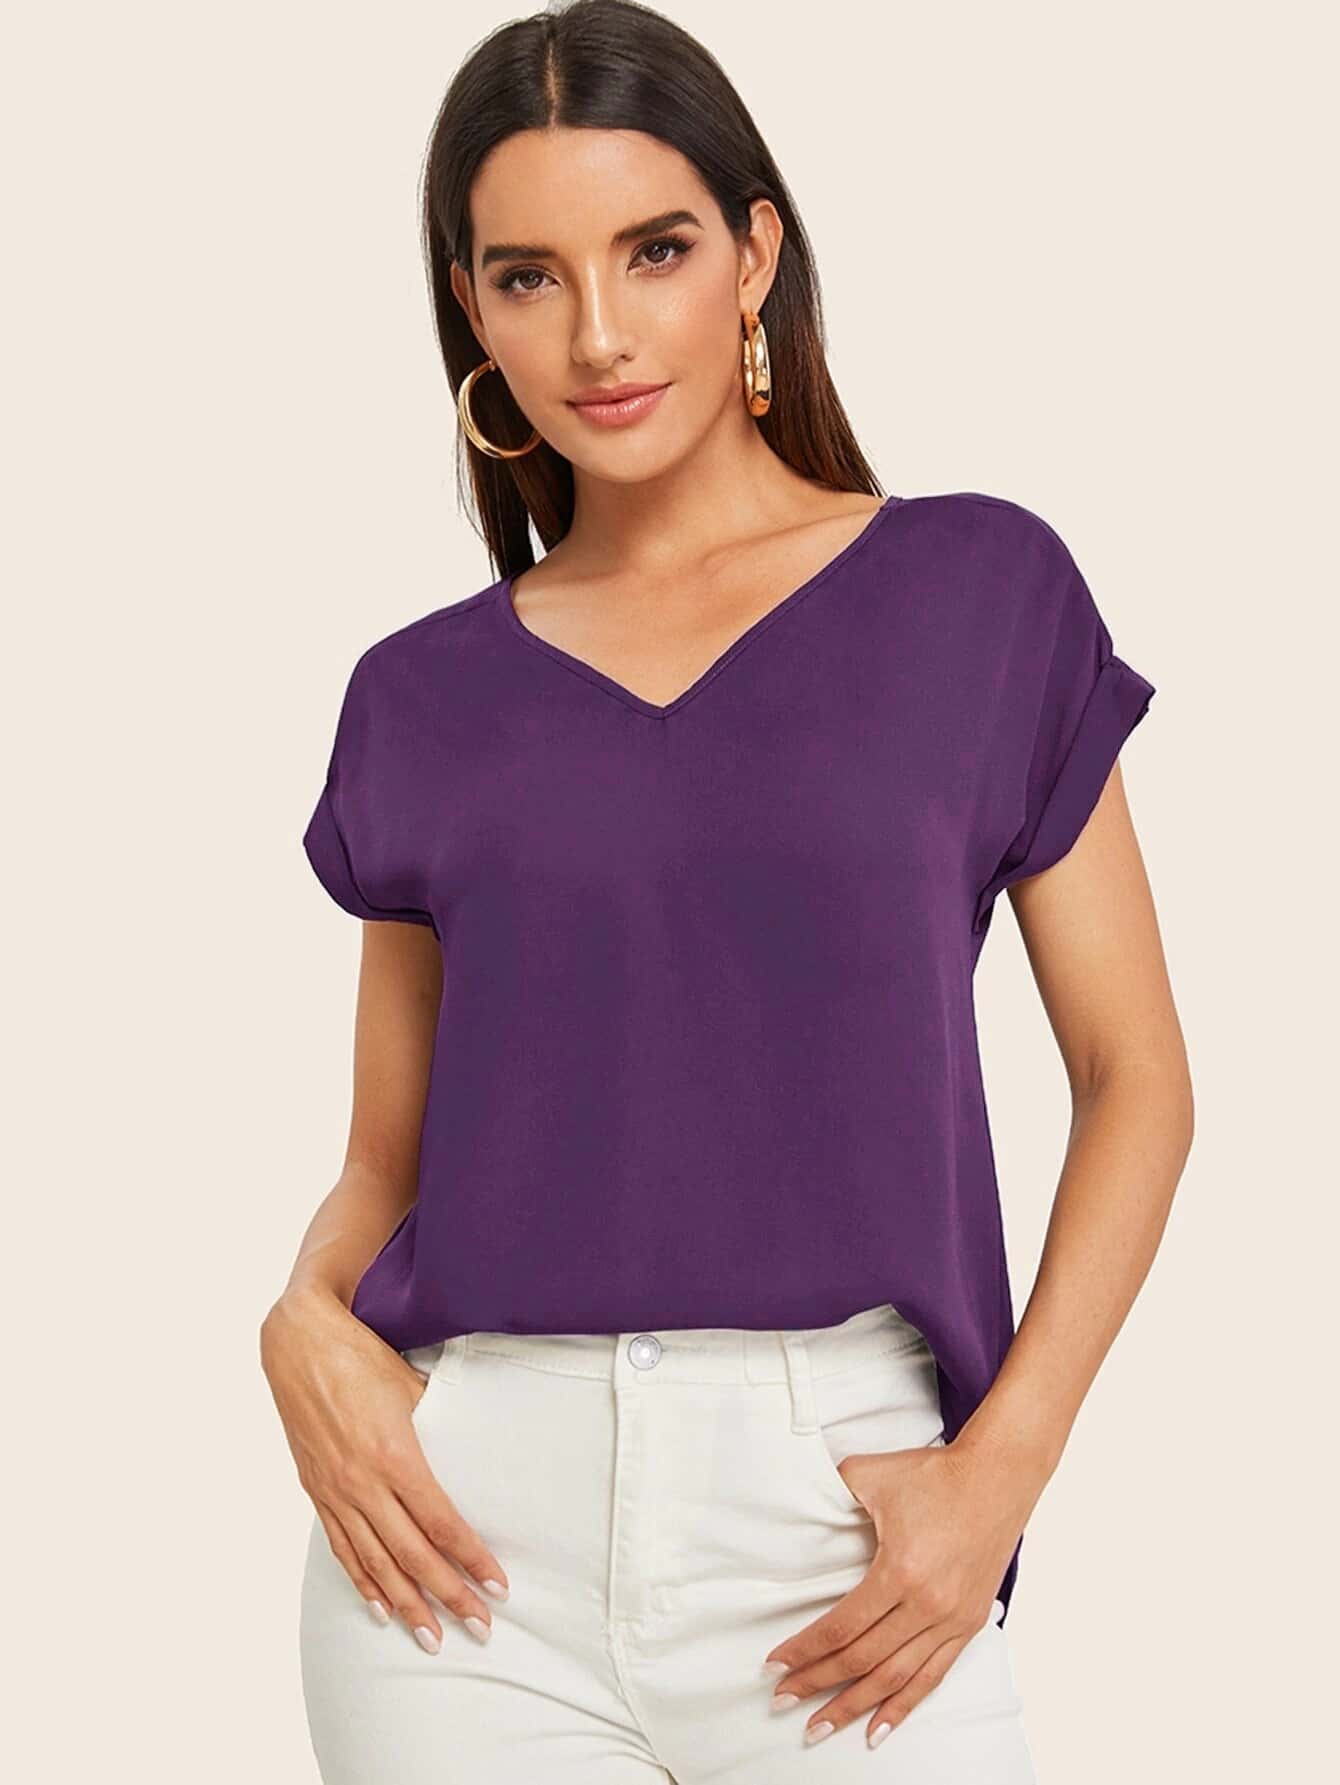 Round Neck Roll Up Sleeve High Low Hem Top